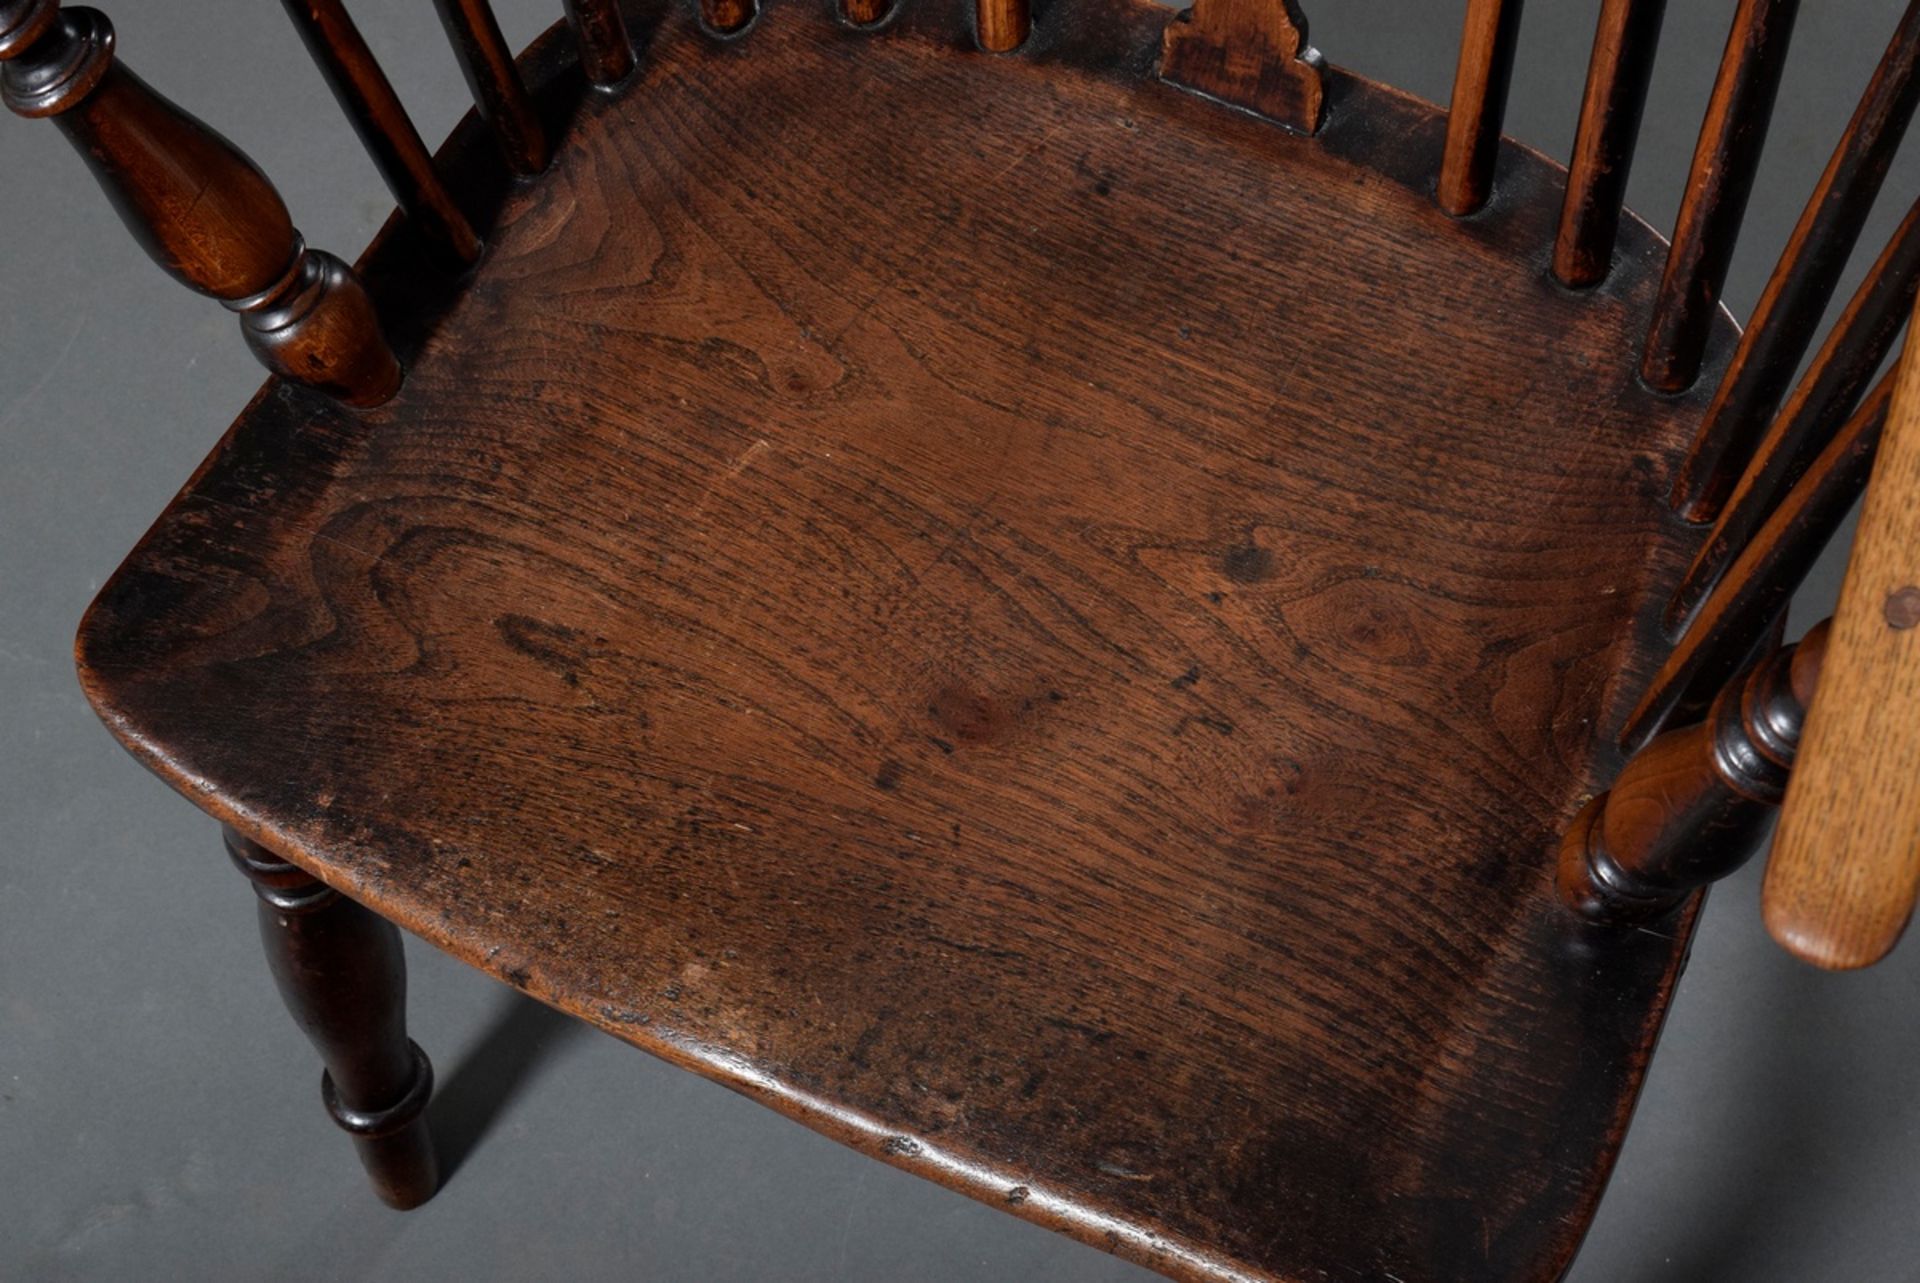 Pair of Windsor Chairs, elm stained, h. 45/89 u. 92, signs of age and use - Image 3 of 6